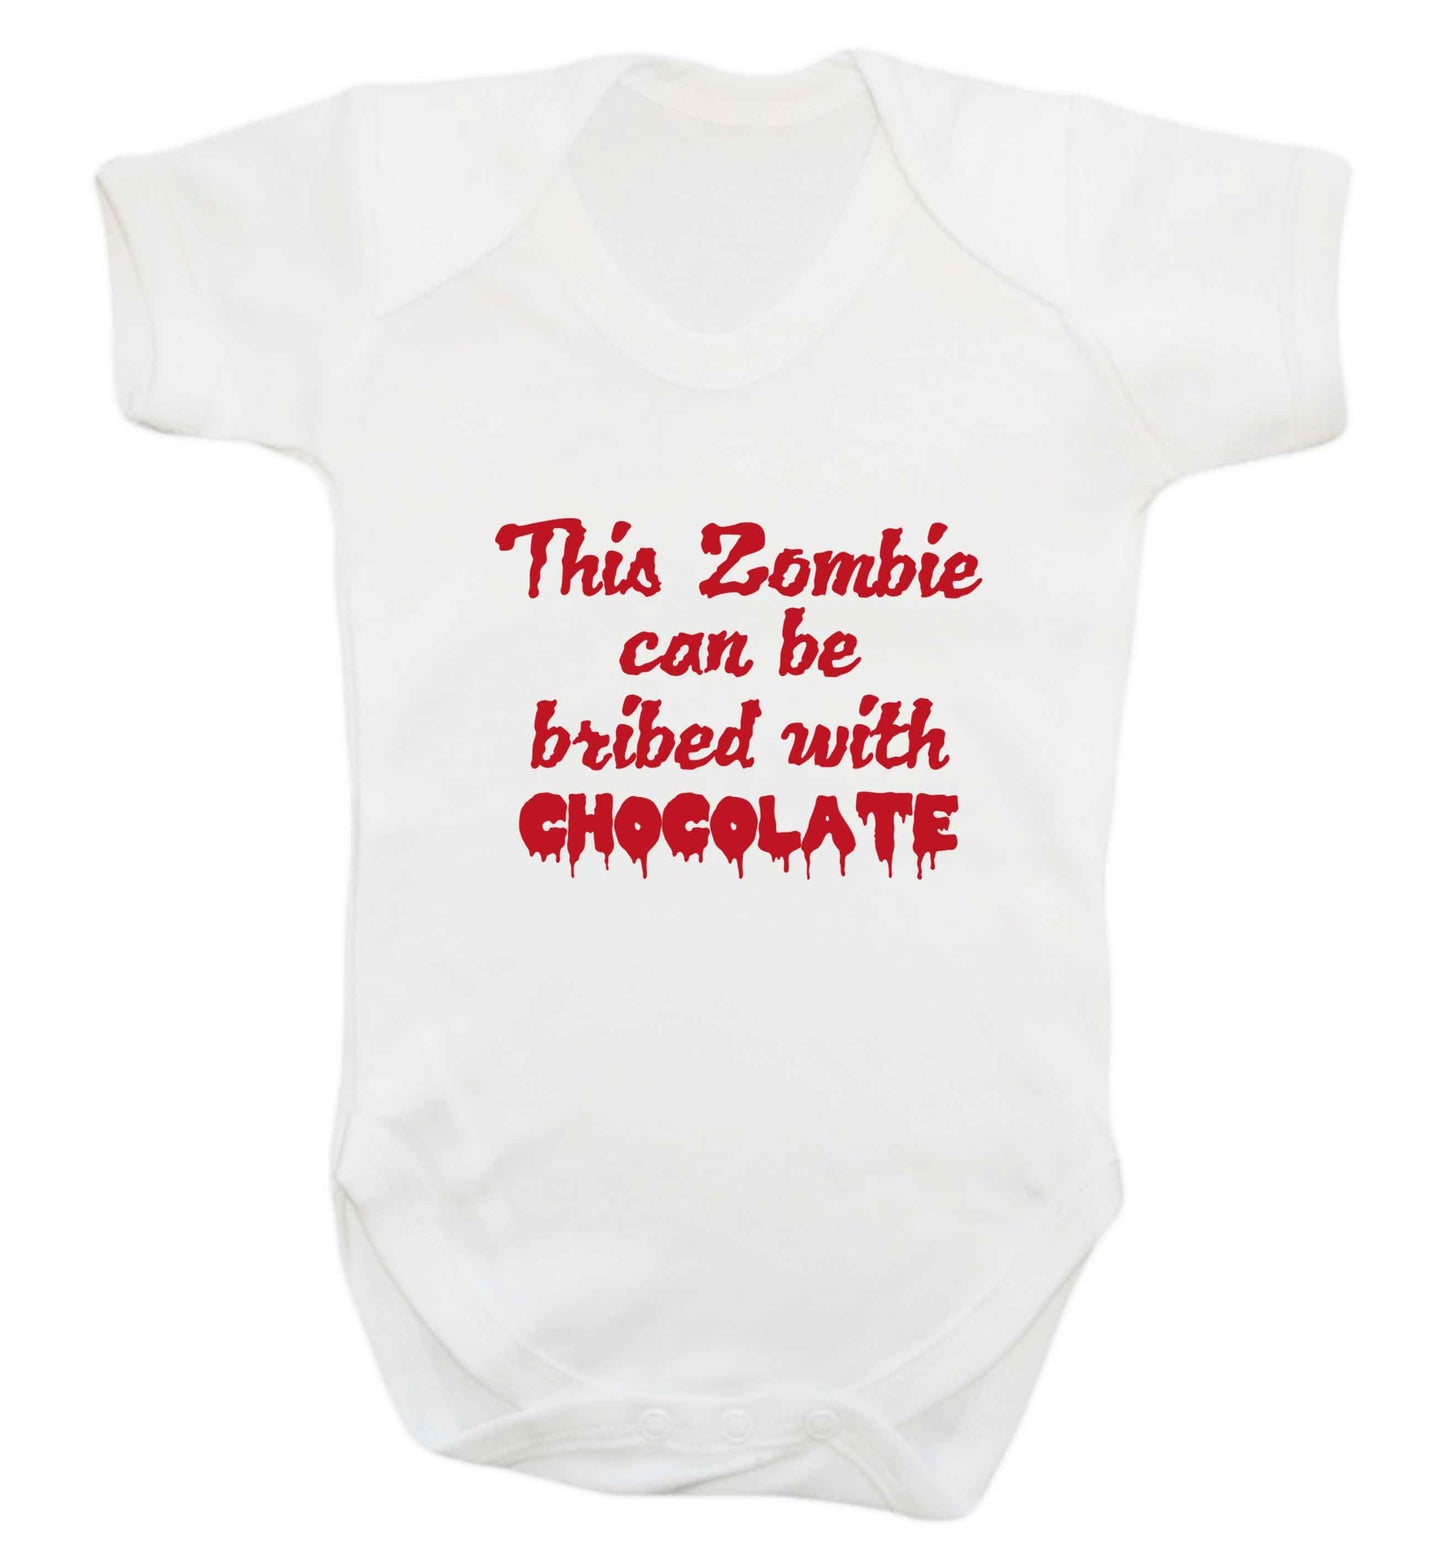 This zombie can be bribed with chocolate baby vest white 18-24 months